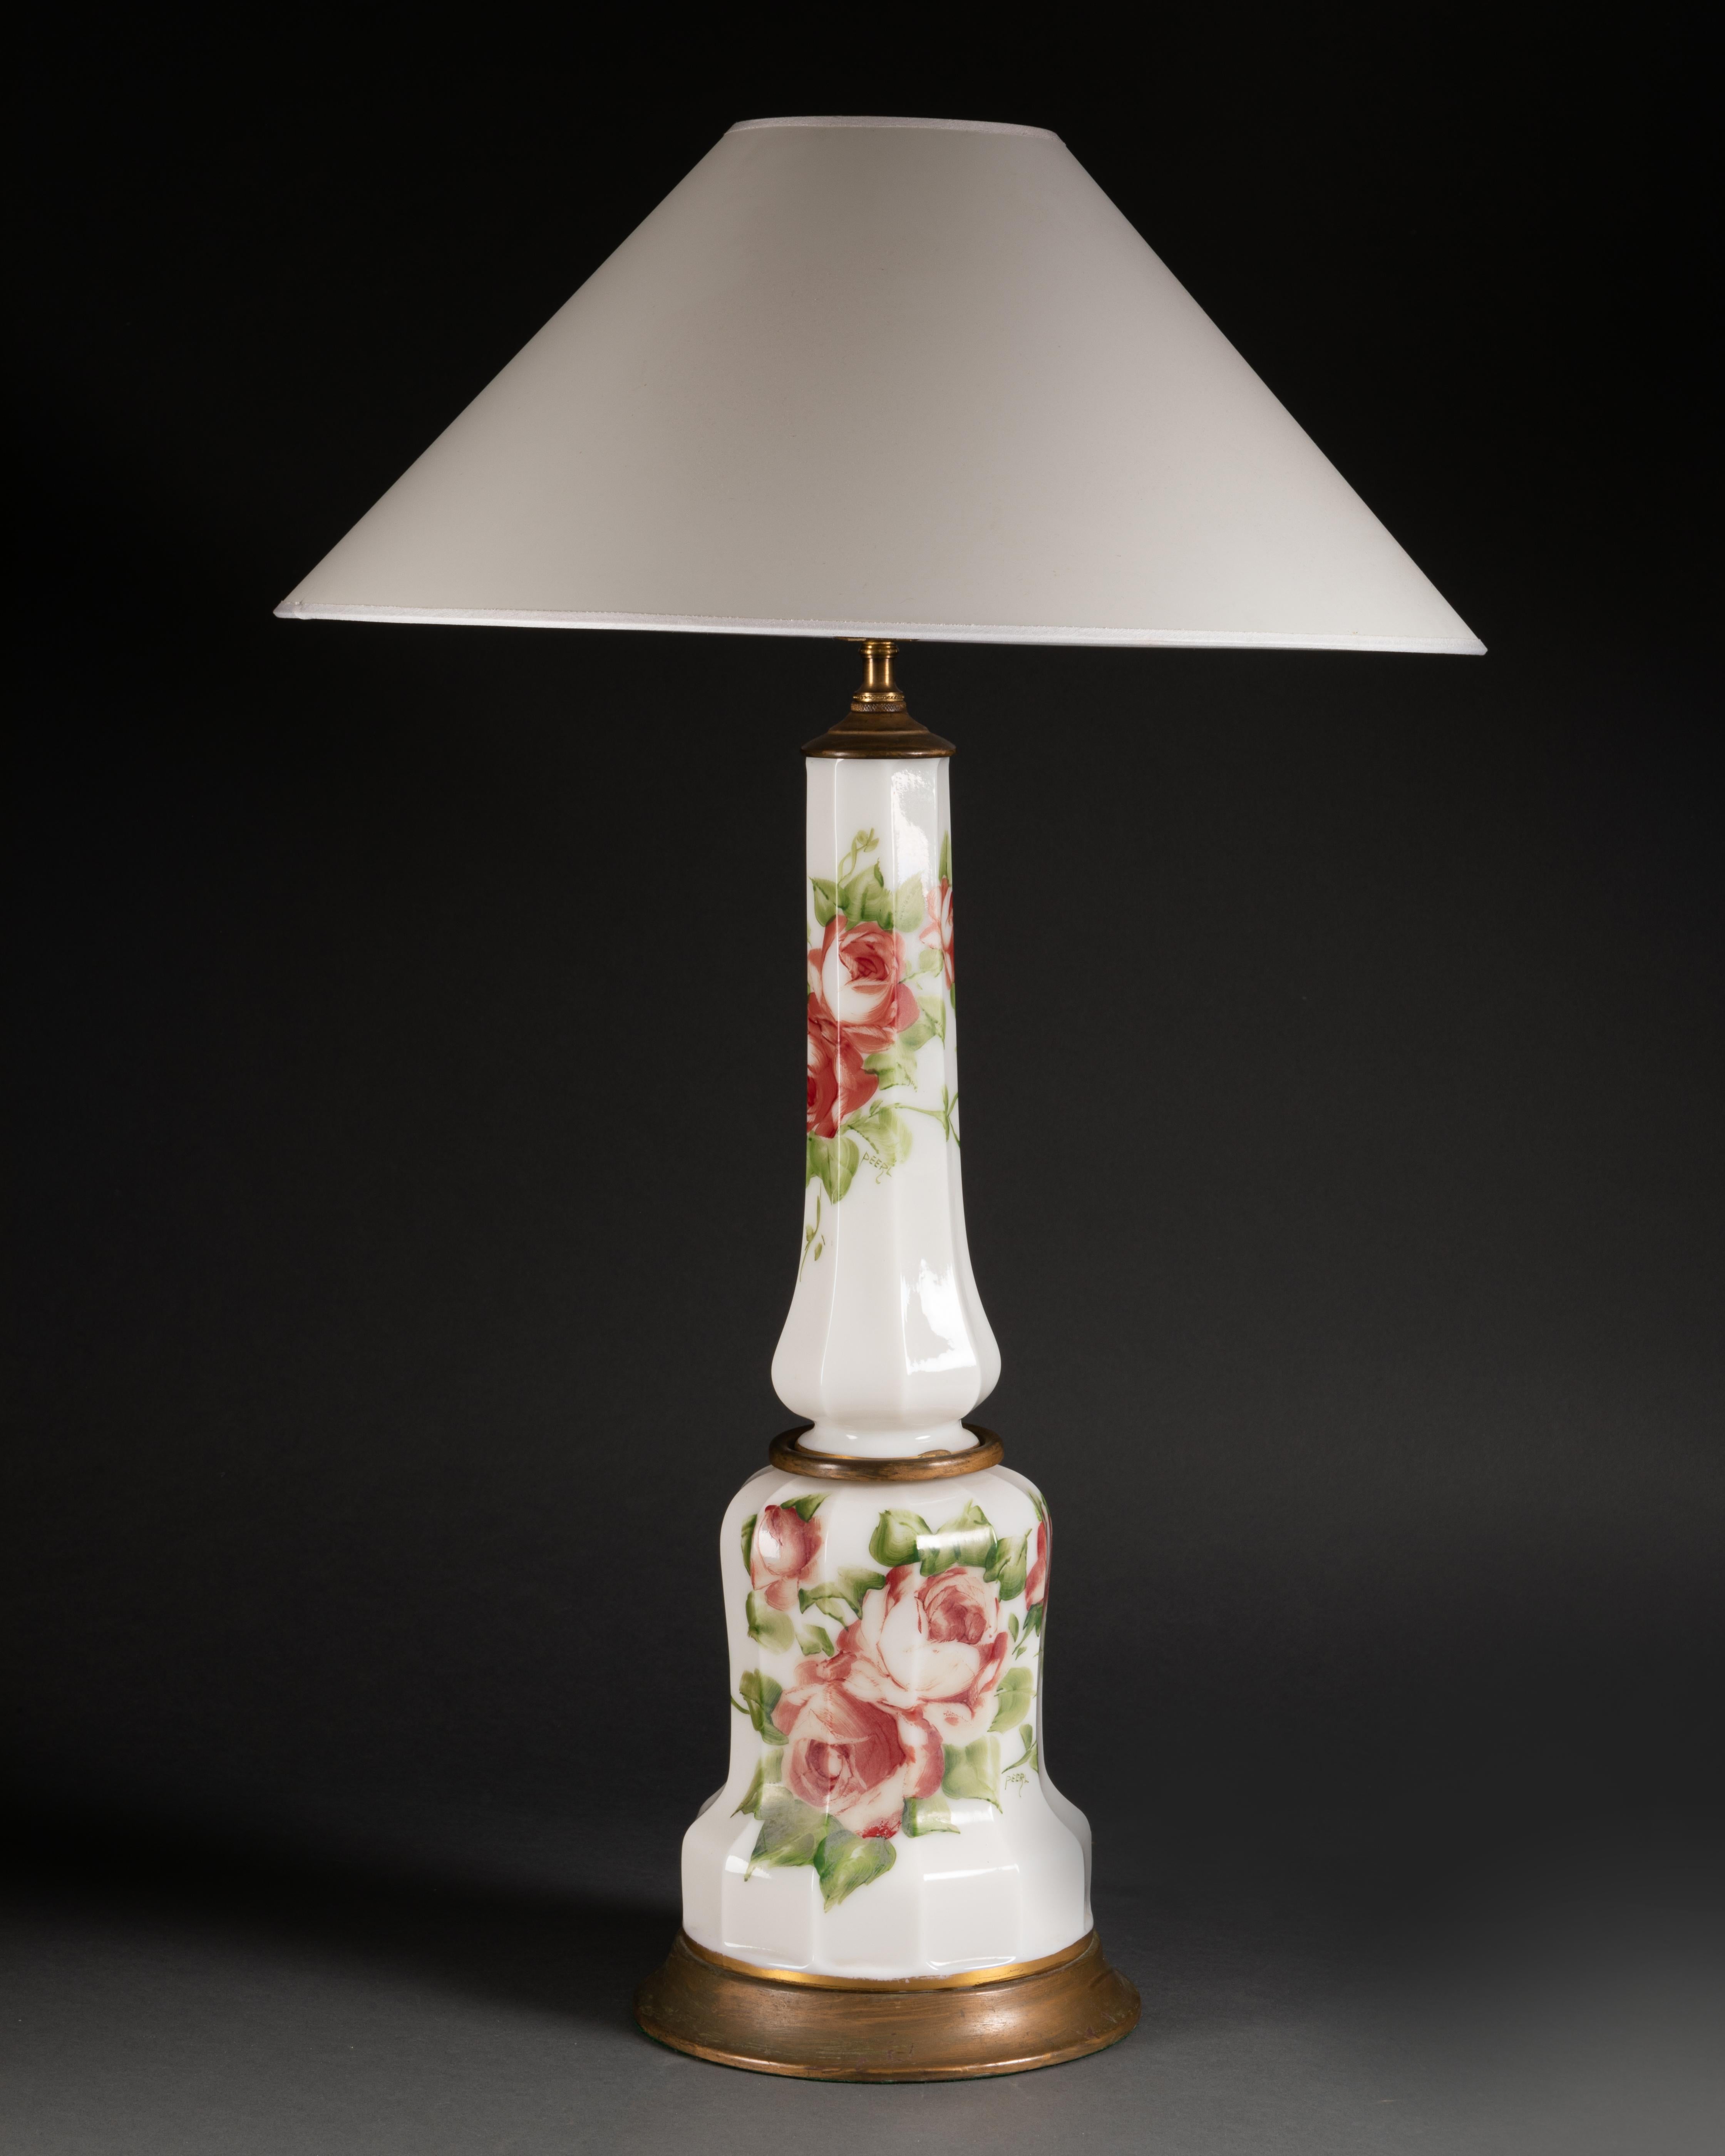 Pair of white overlay glass lamps with hand painted roses. French or English, circa 1920. Wired to the EU standard. Sold with or without lampshade. Height to socket 60 cm.